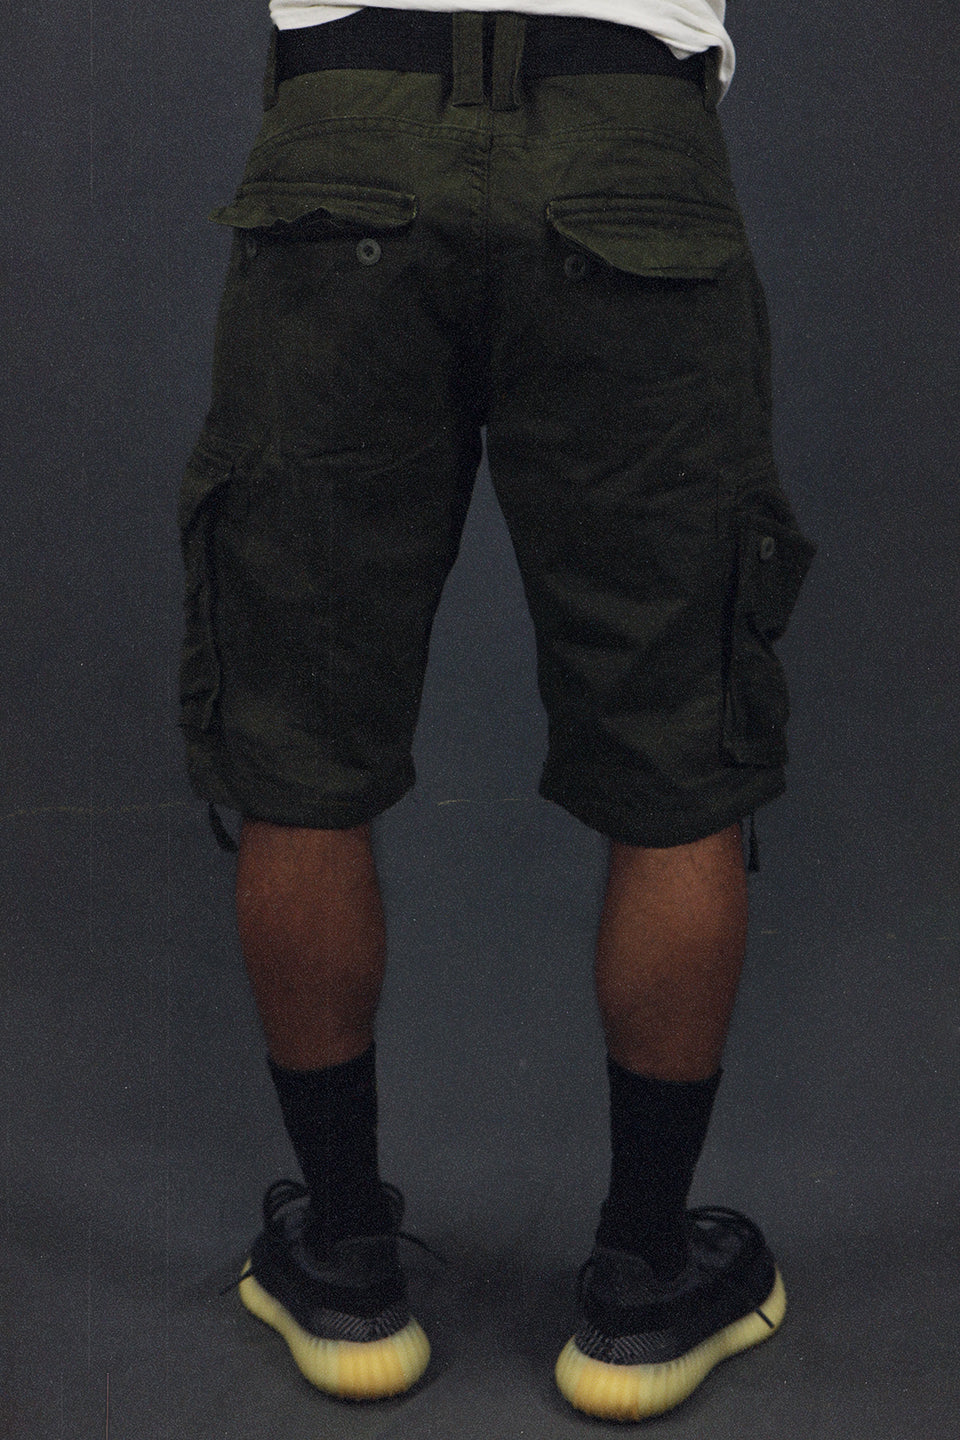 back of the Men's Army Green Combat Shorts Six Pocket Cargo Shorts To Match Sneakers | Army Green